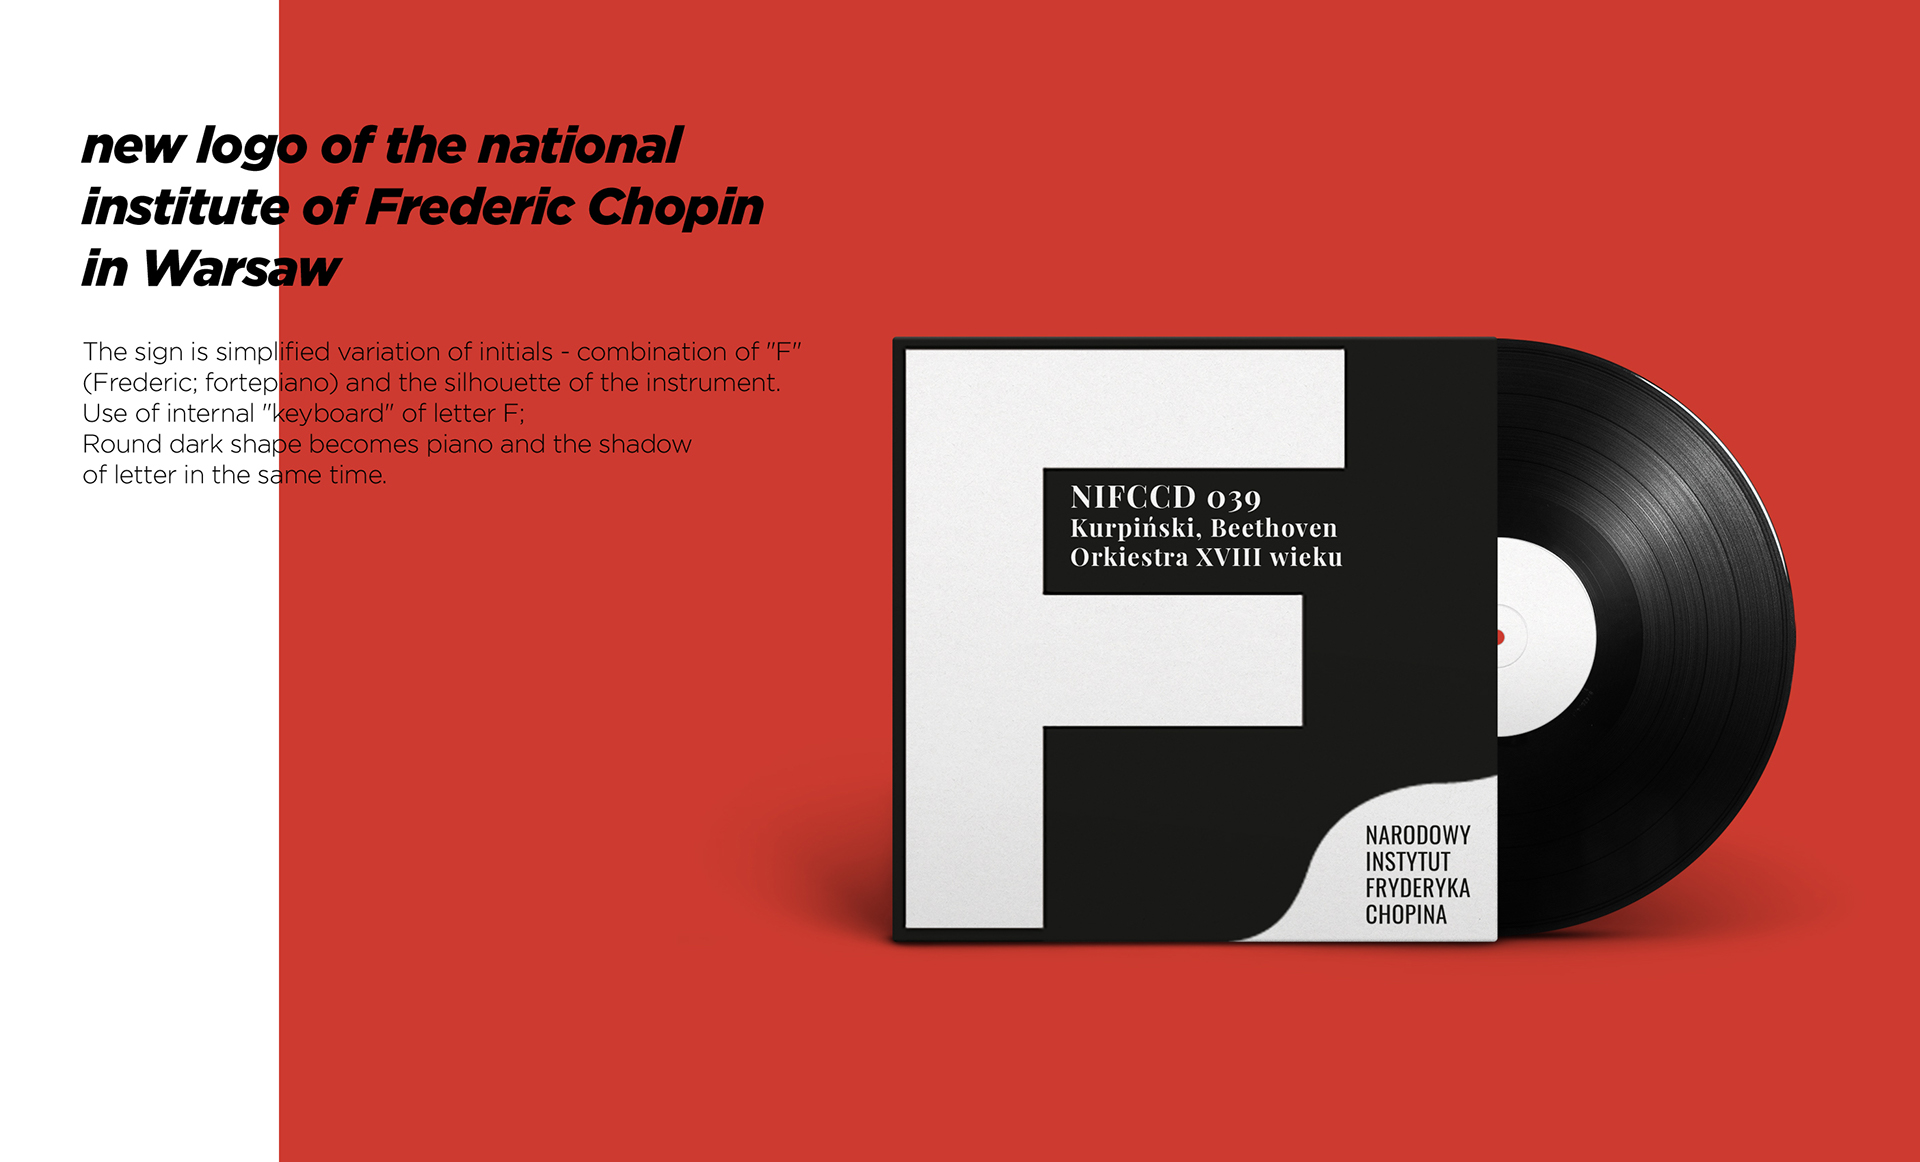 chopin's institute | new logo concept | Behance